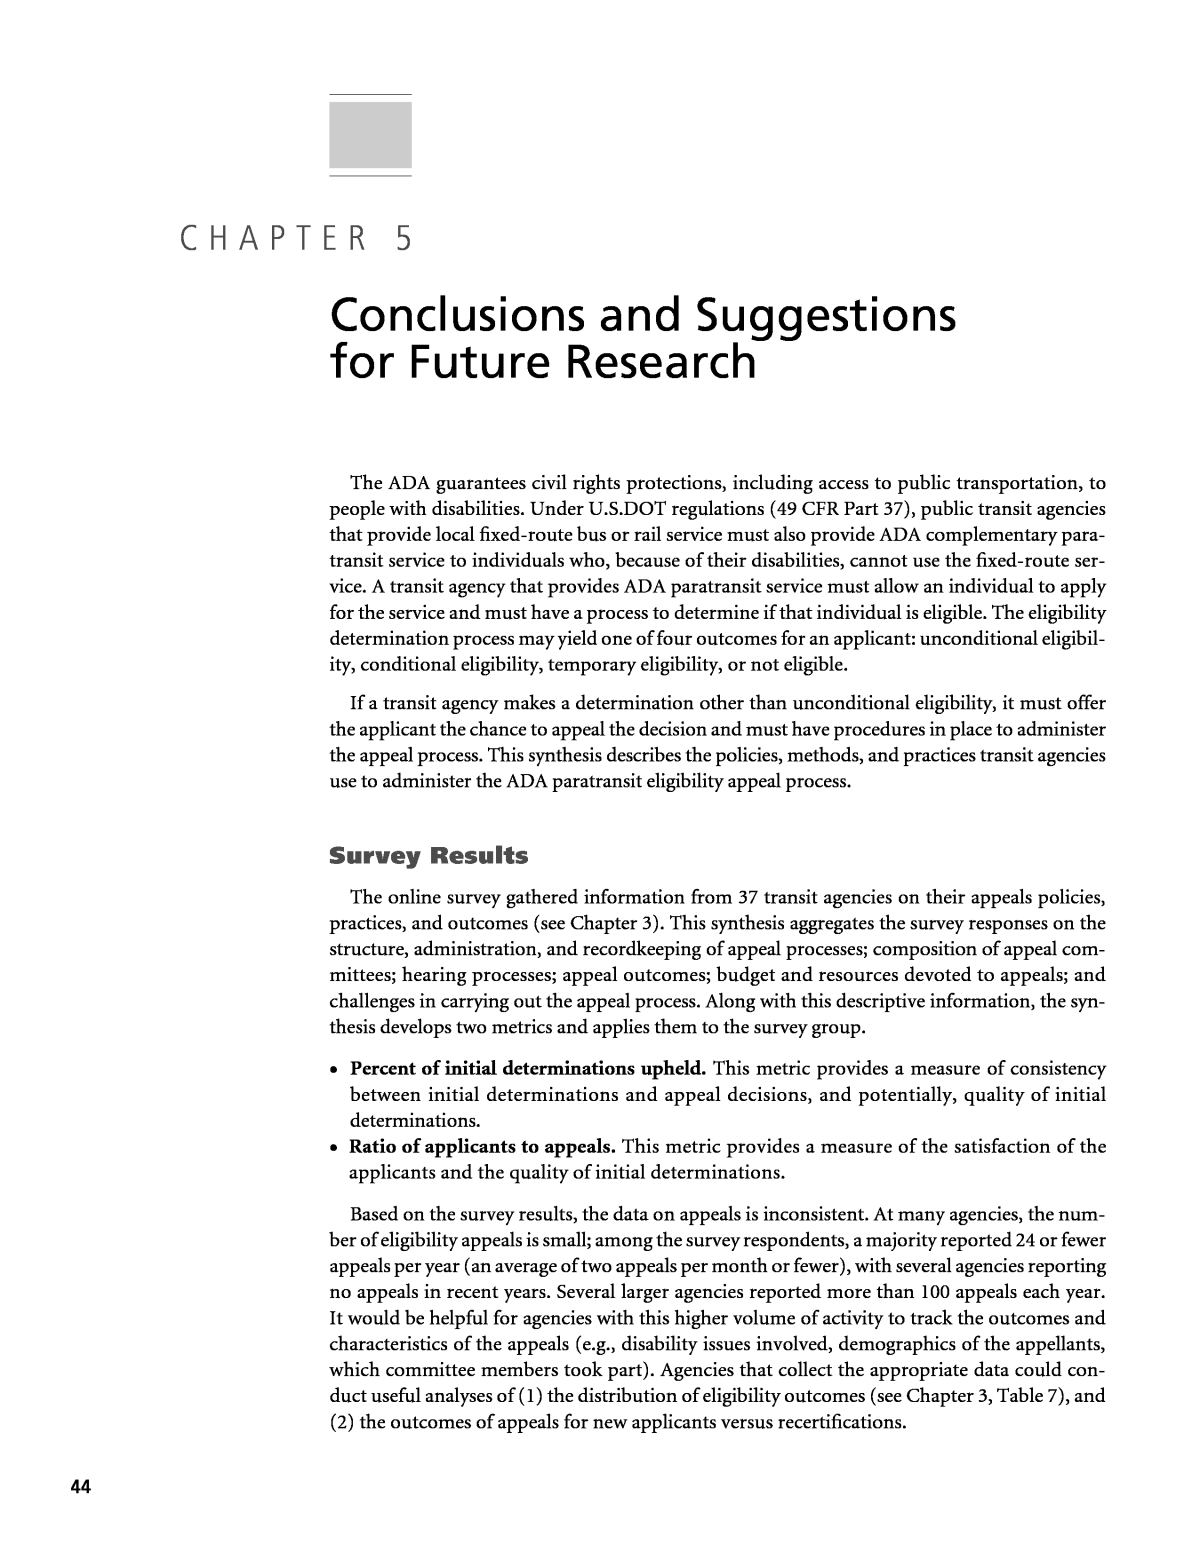 Chapter 25 - Conclusions and Suggestions for Future Research